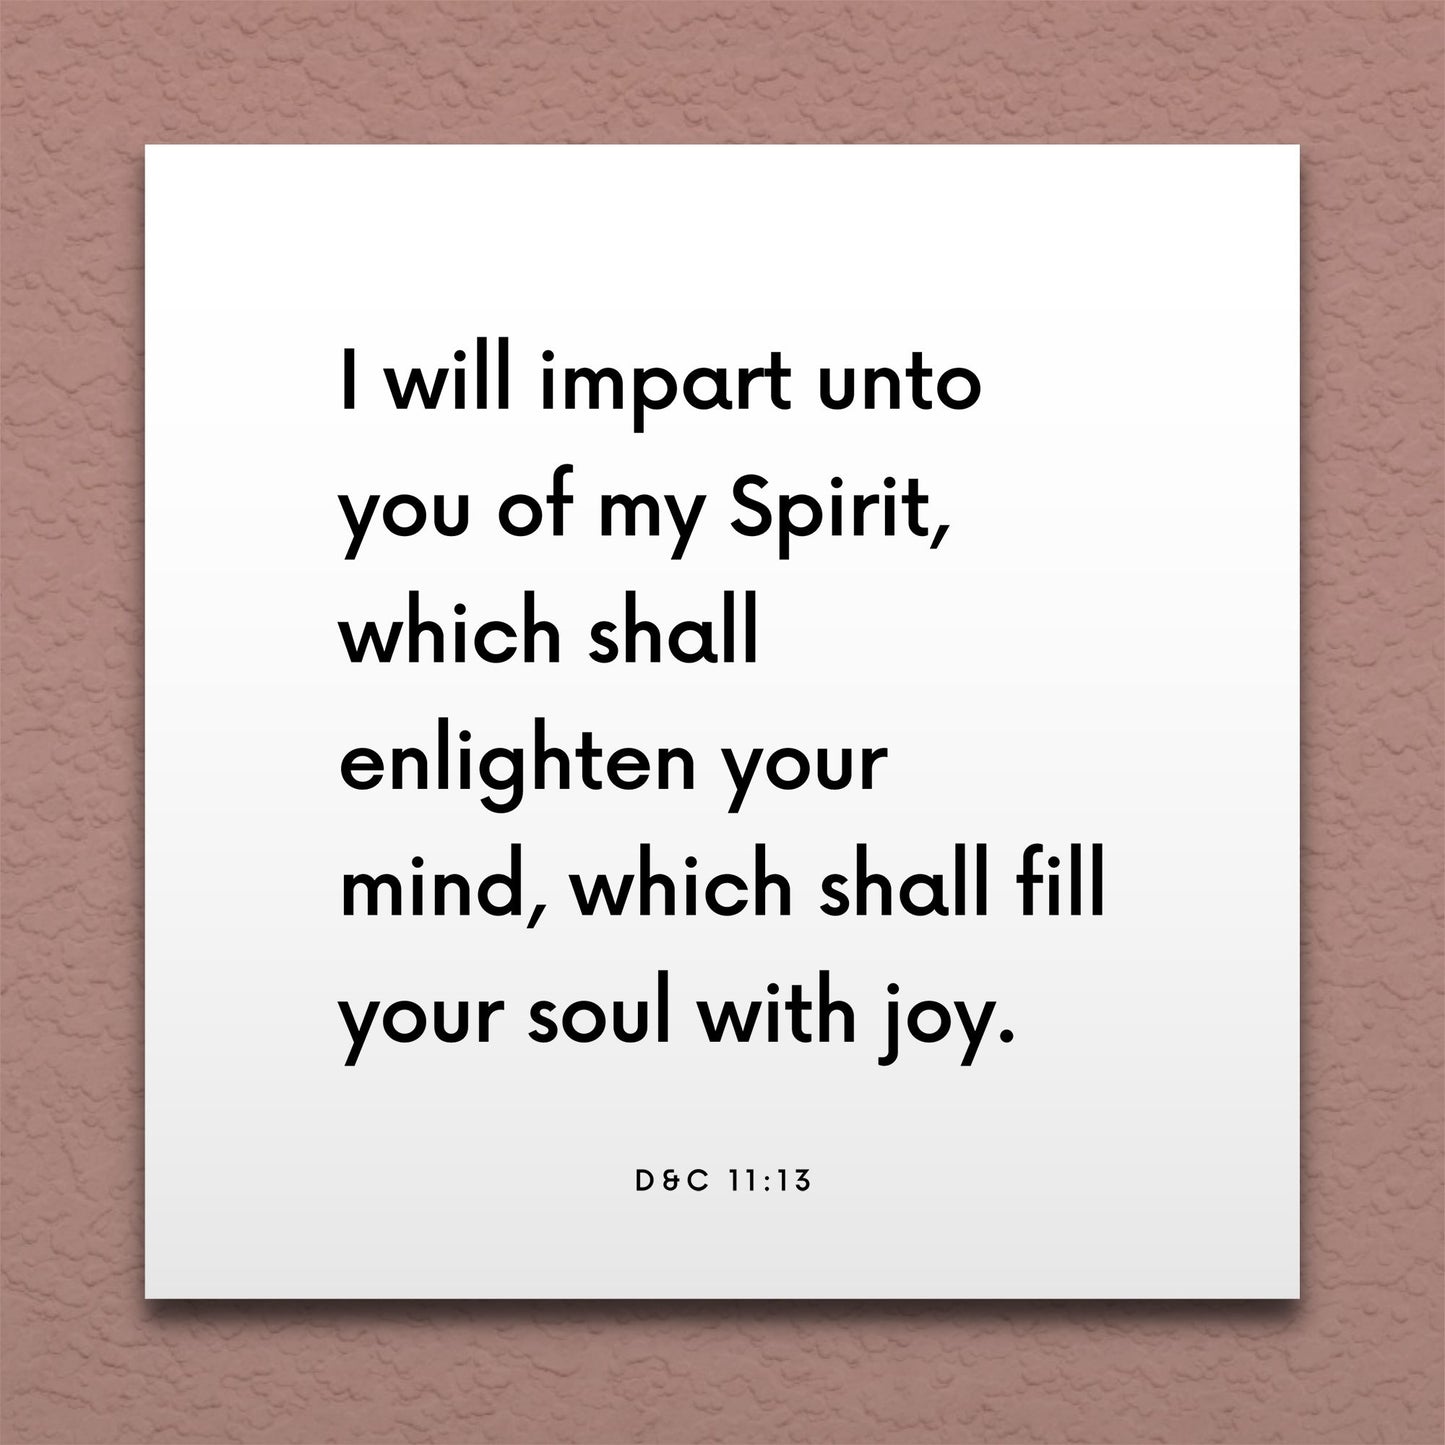 Wall-mounted scripture tile for D&C 11:13 - "I will impart unto you of my Spirit"